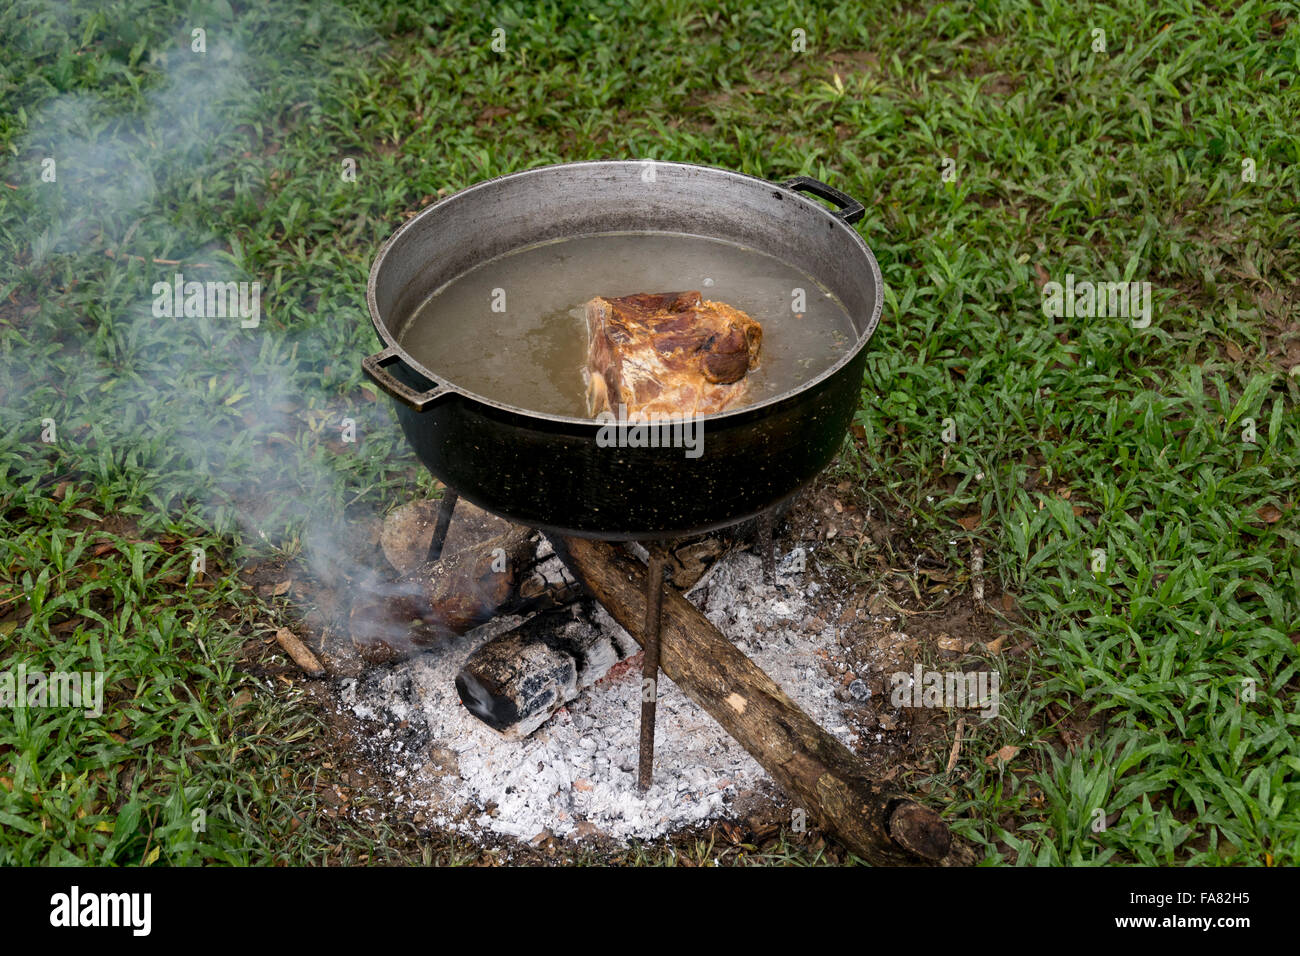 Christmas ham being cooked outdoors in a coal pot. Stock Photo